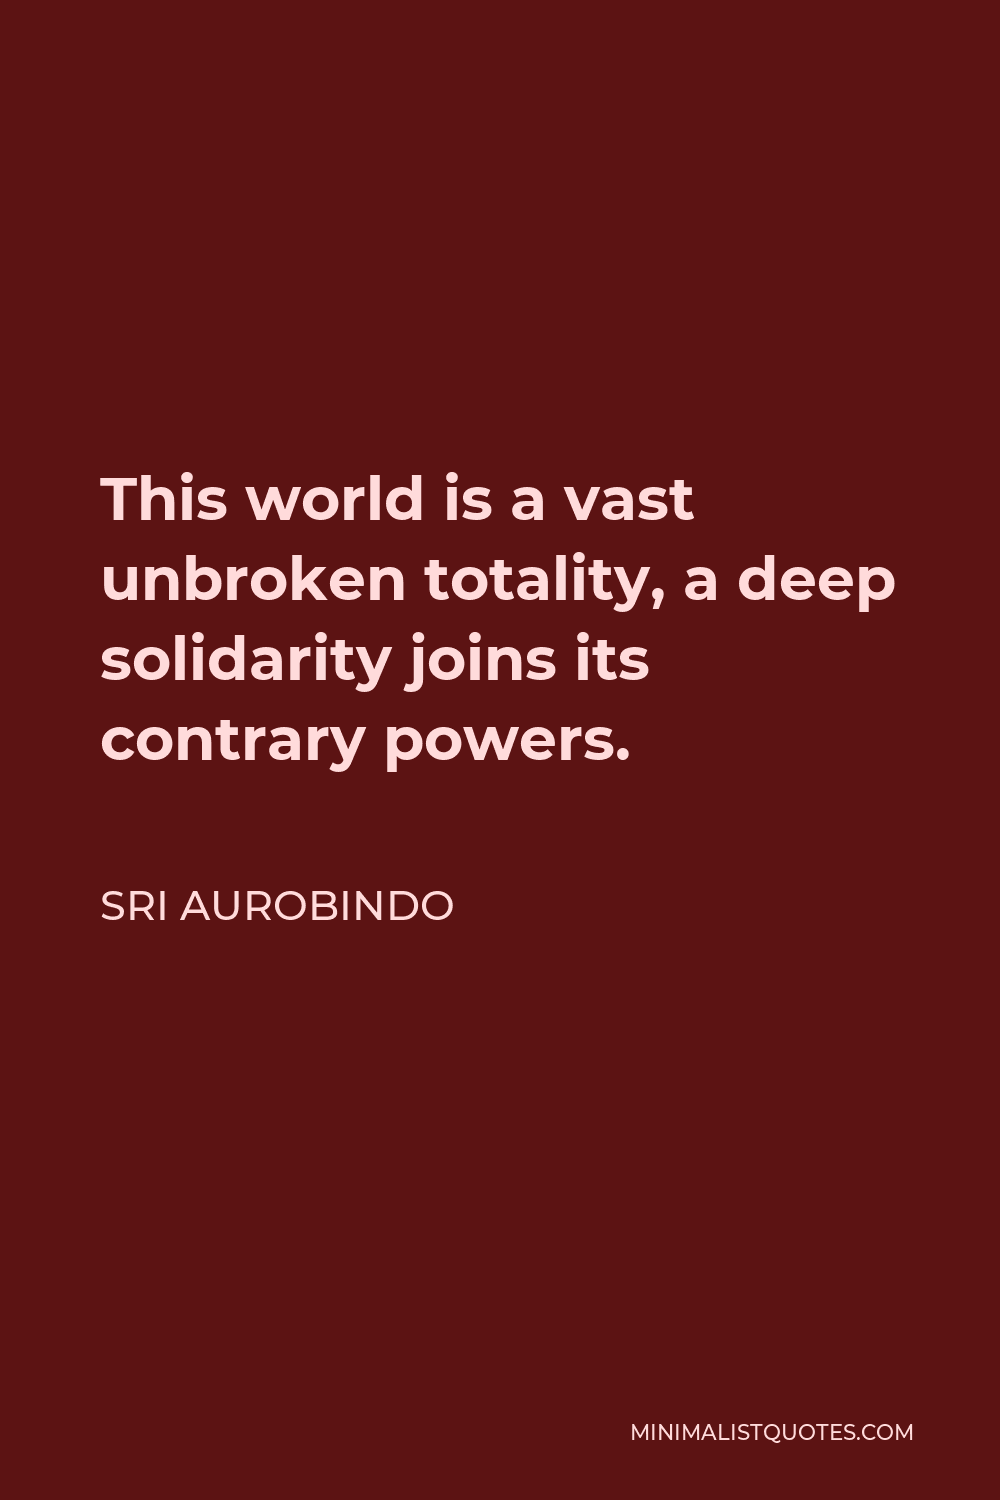 Sri Aurobindo Quote - This world is a vast unbroken totality, a deep solidarity joins its contrary powers.